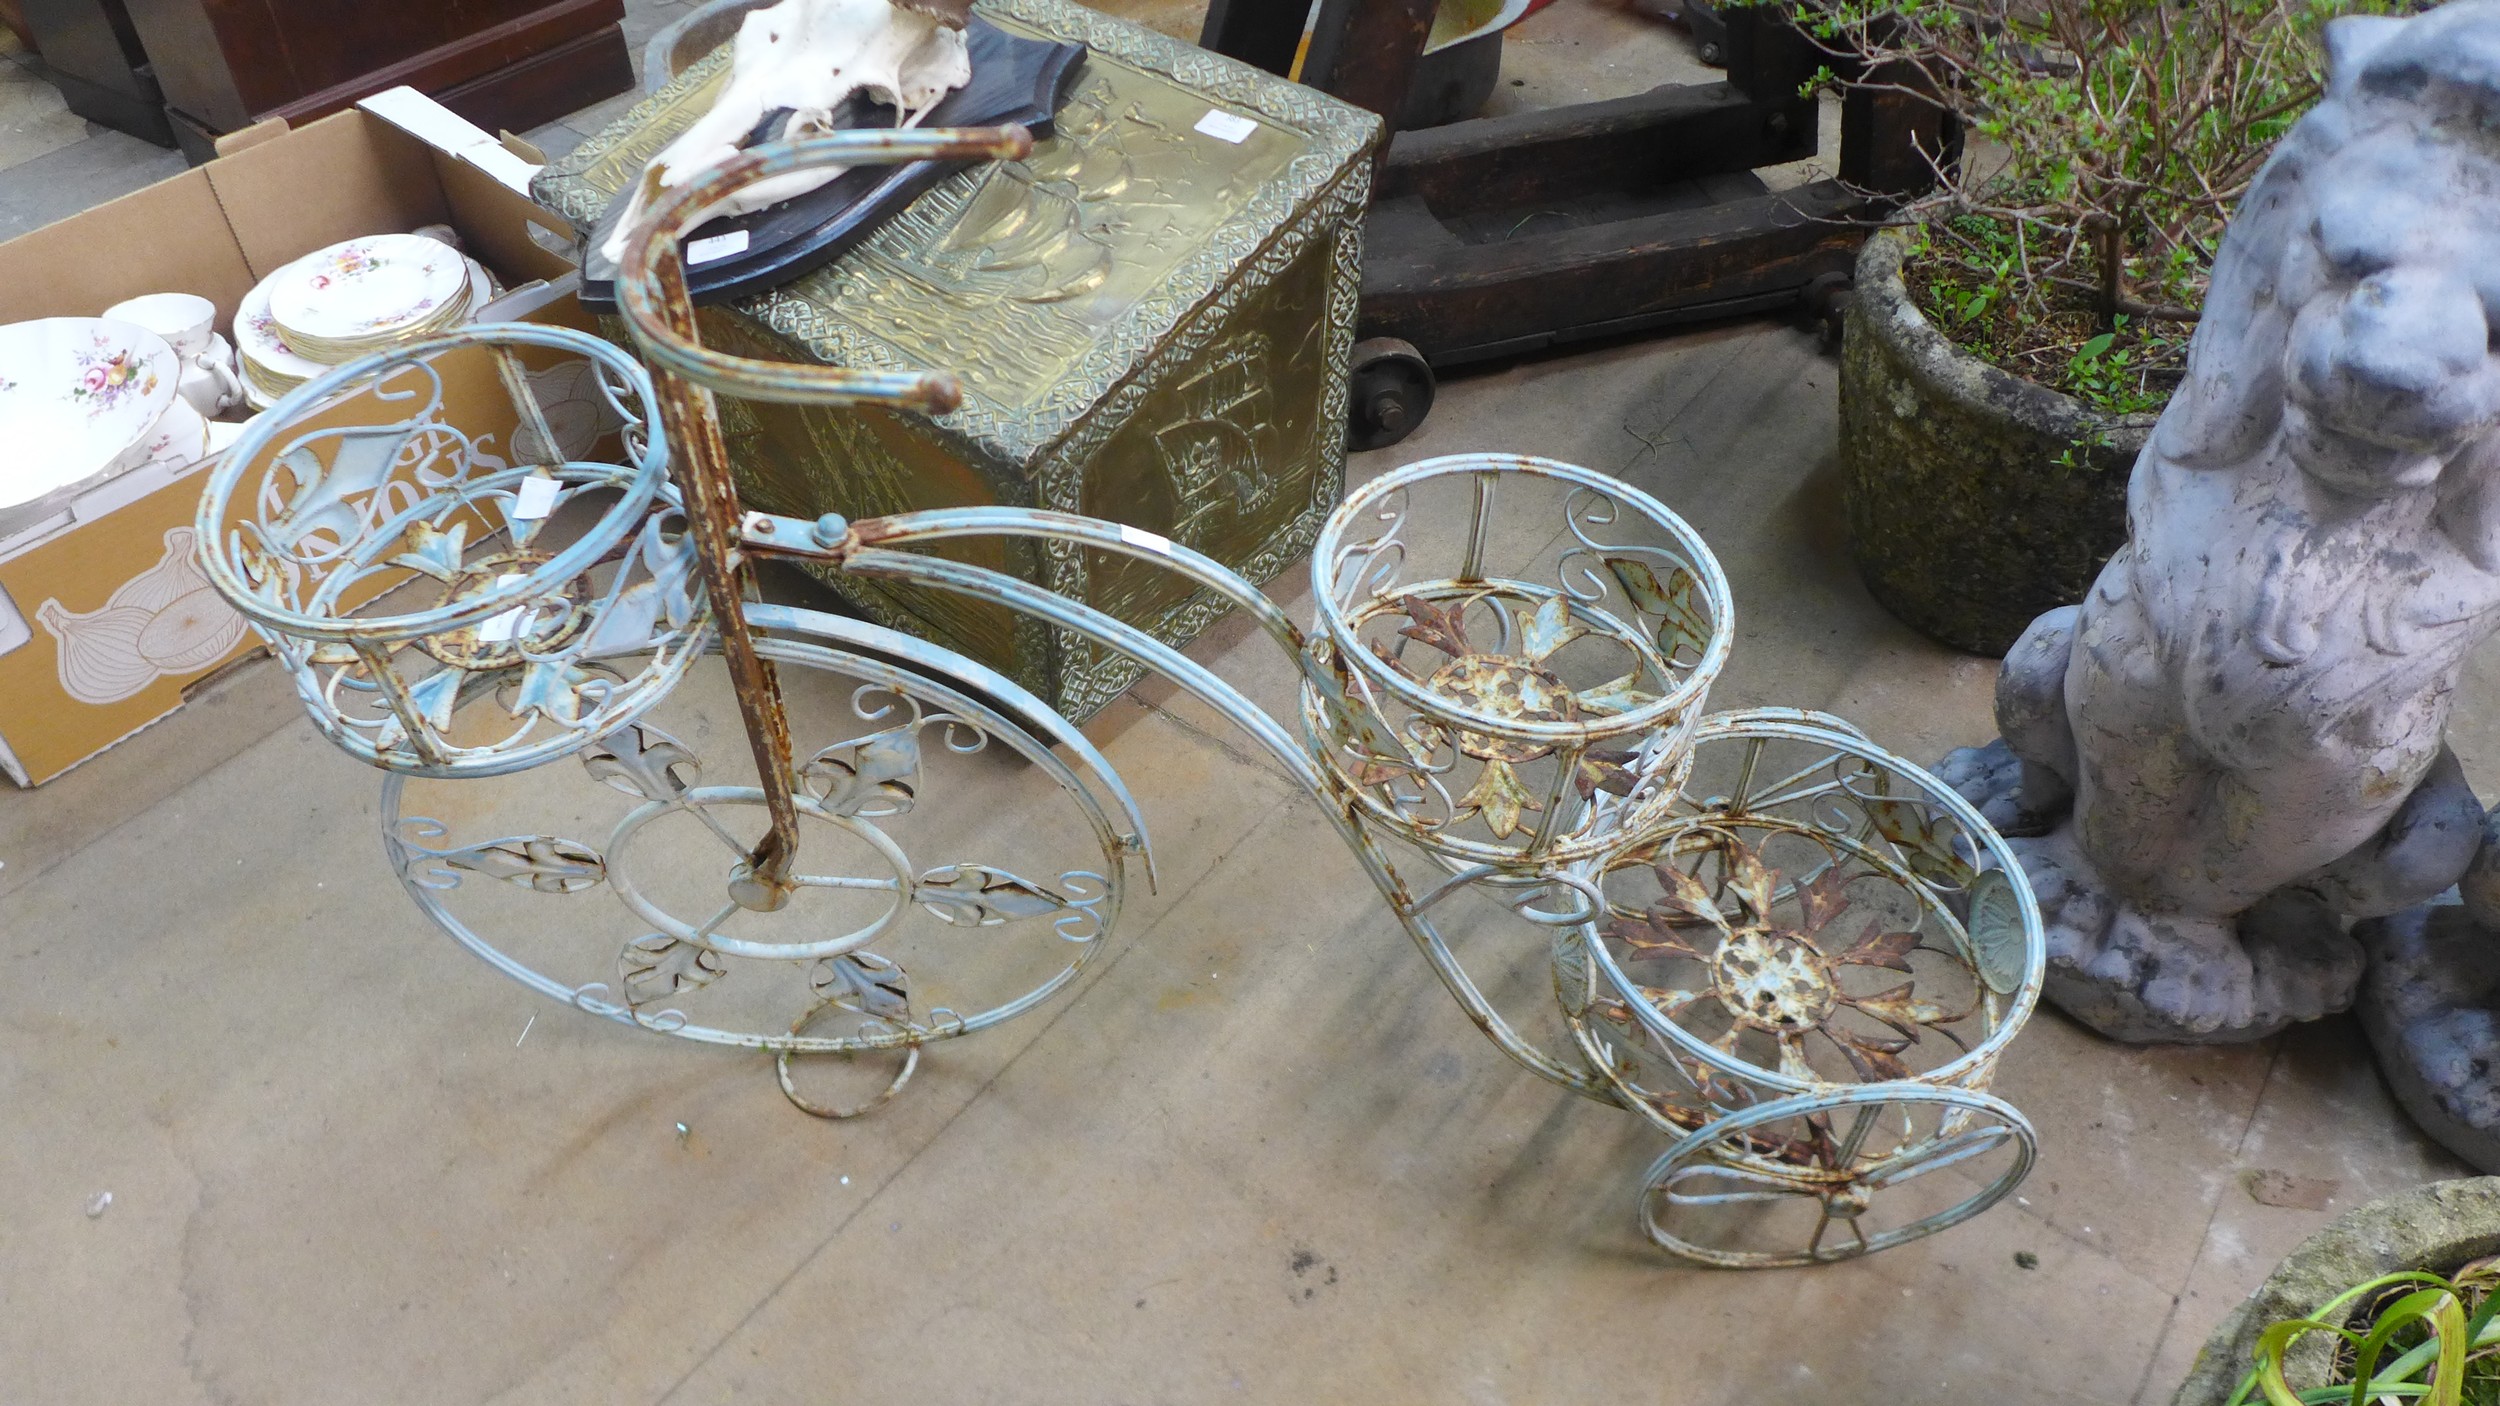 A French style metal tricycle shaped garden planter